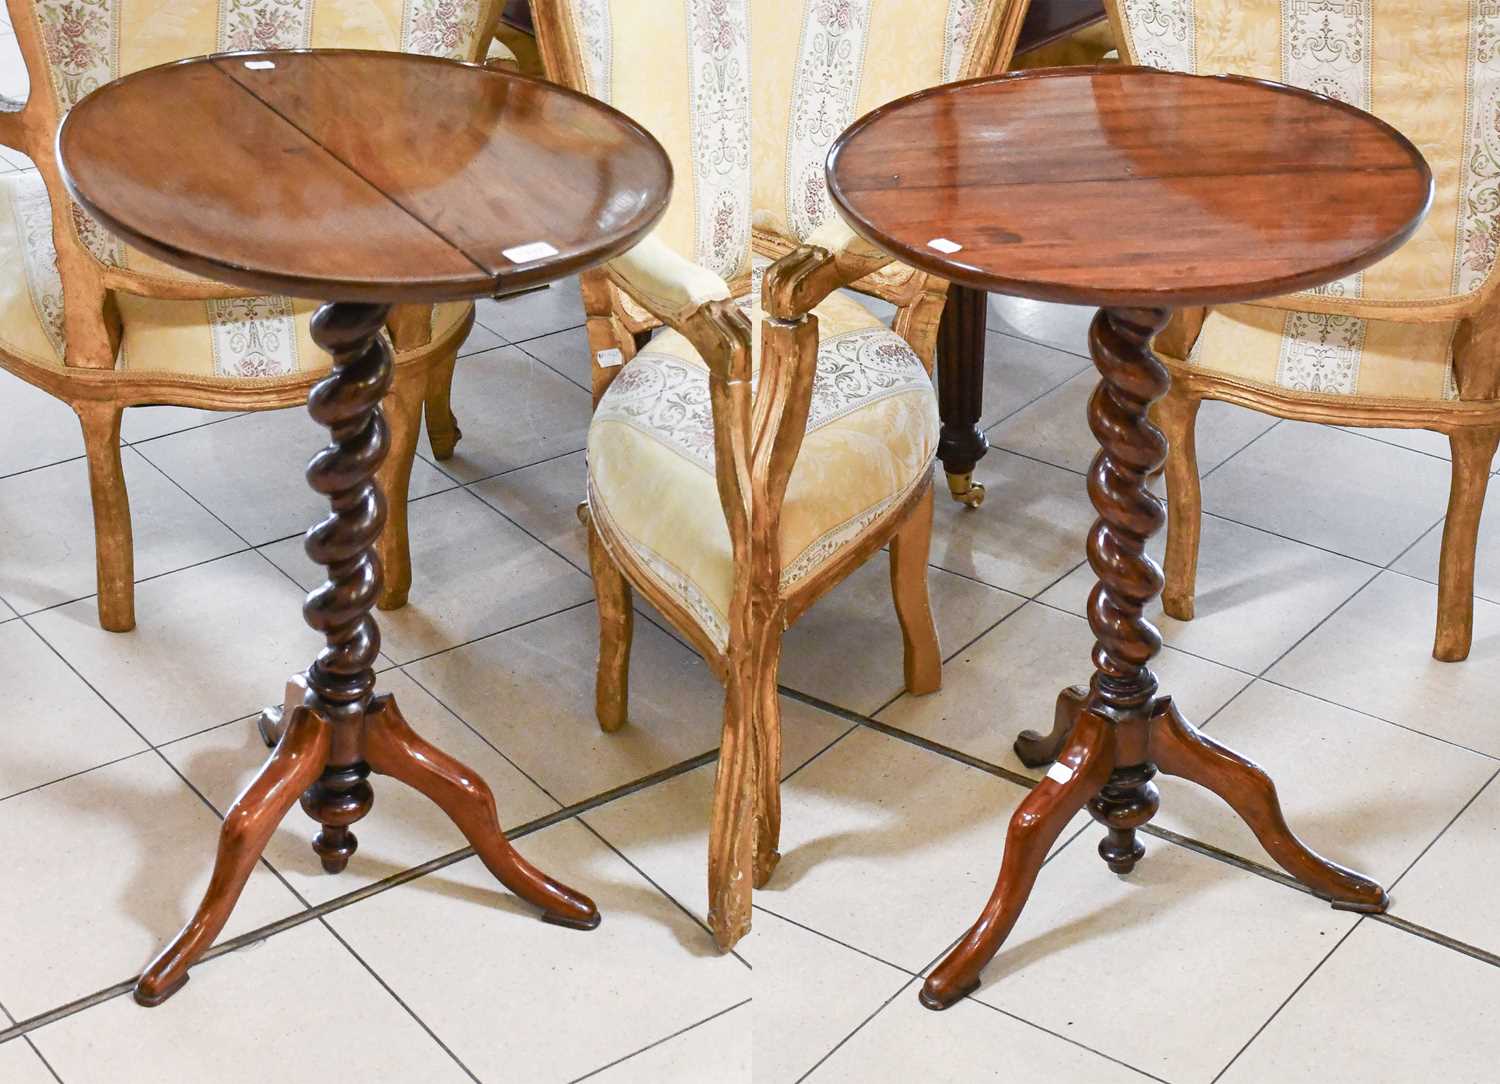 A Pair of Mahogany Tripod Tables, the circualr dished tops supported by a boldly turned standard and